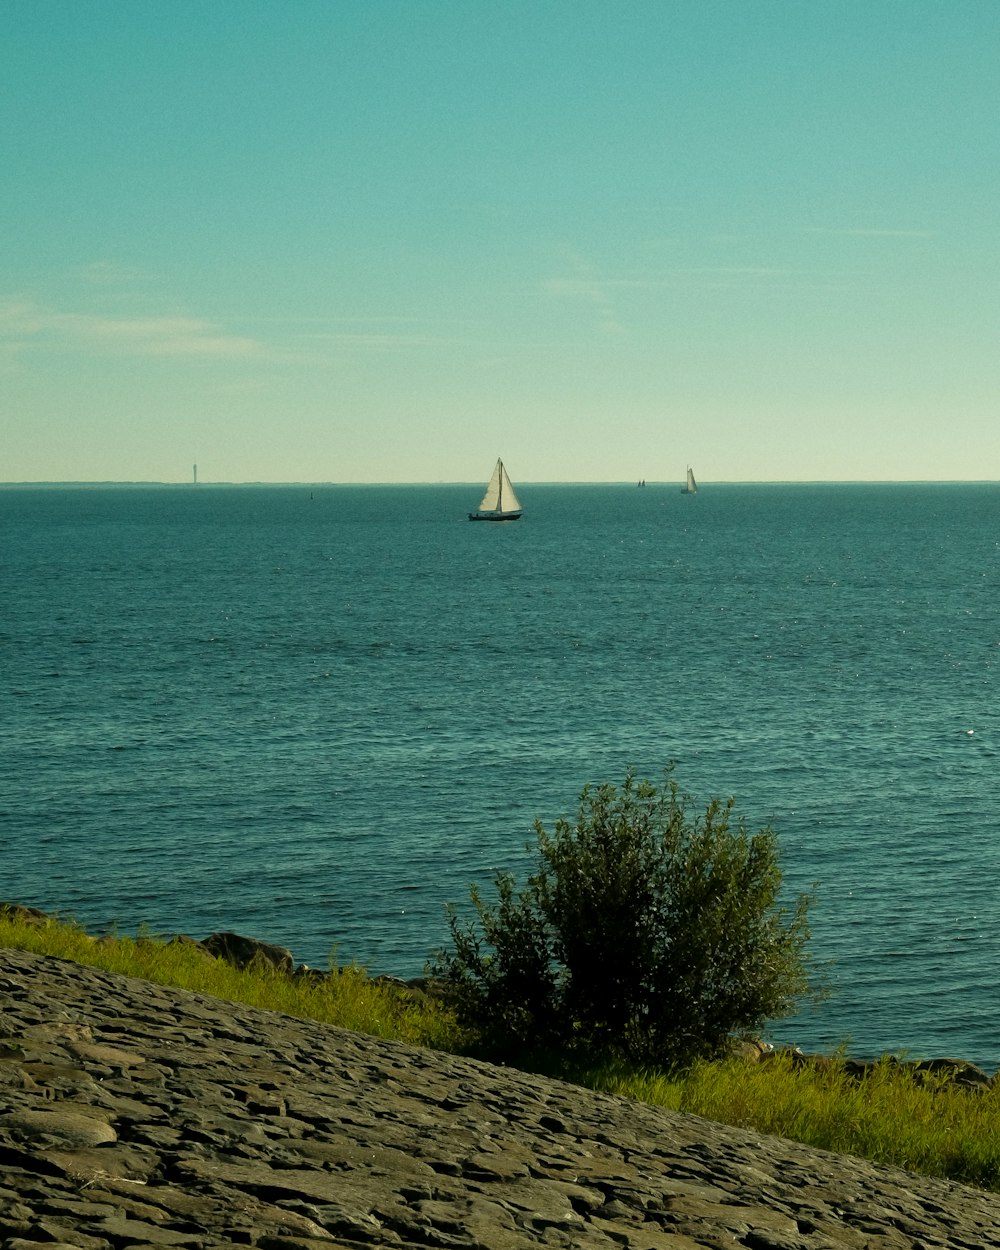 a sailboat is out on the water in the distance